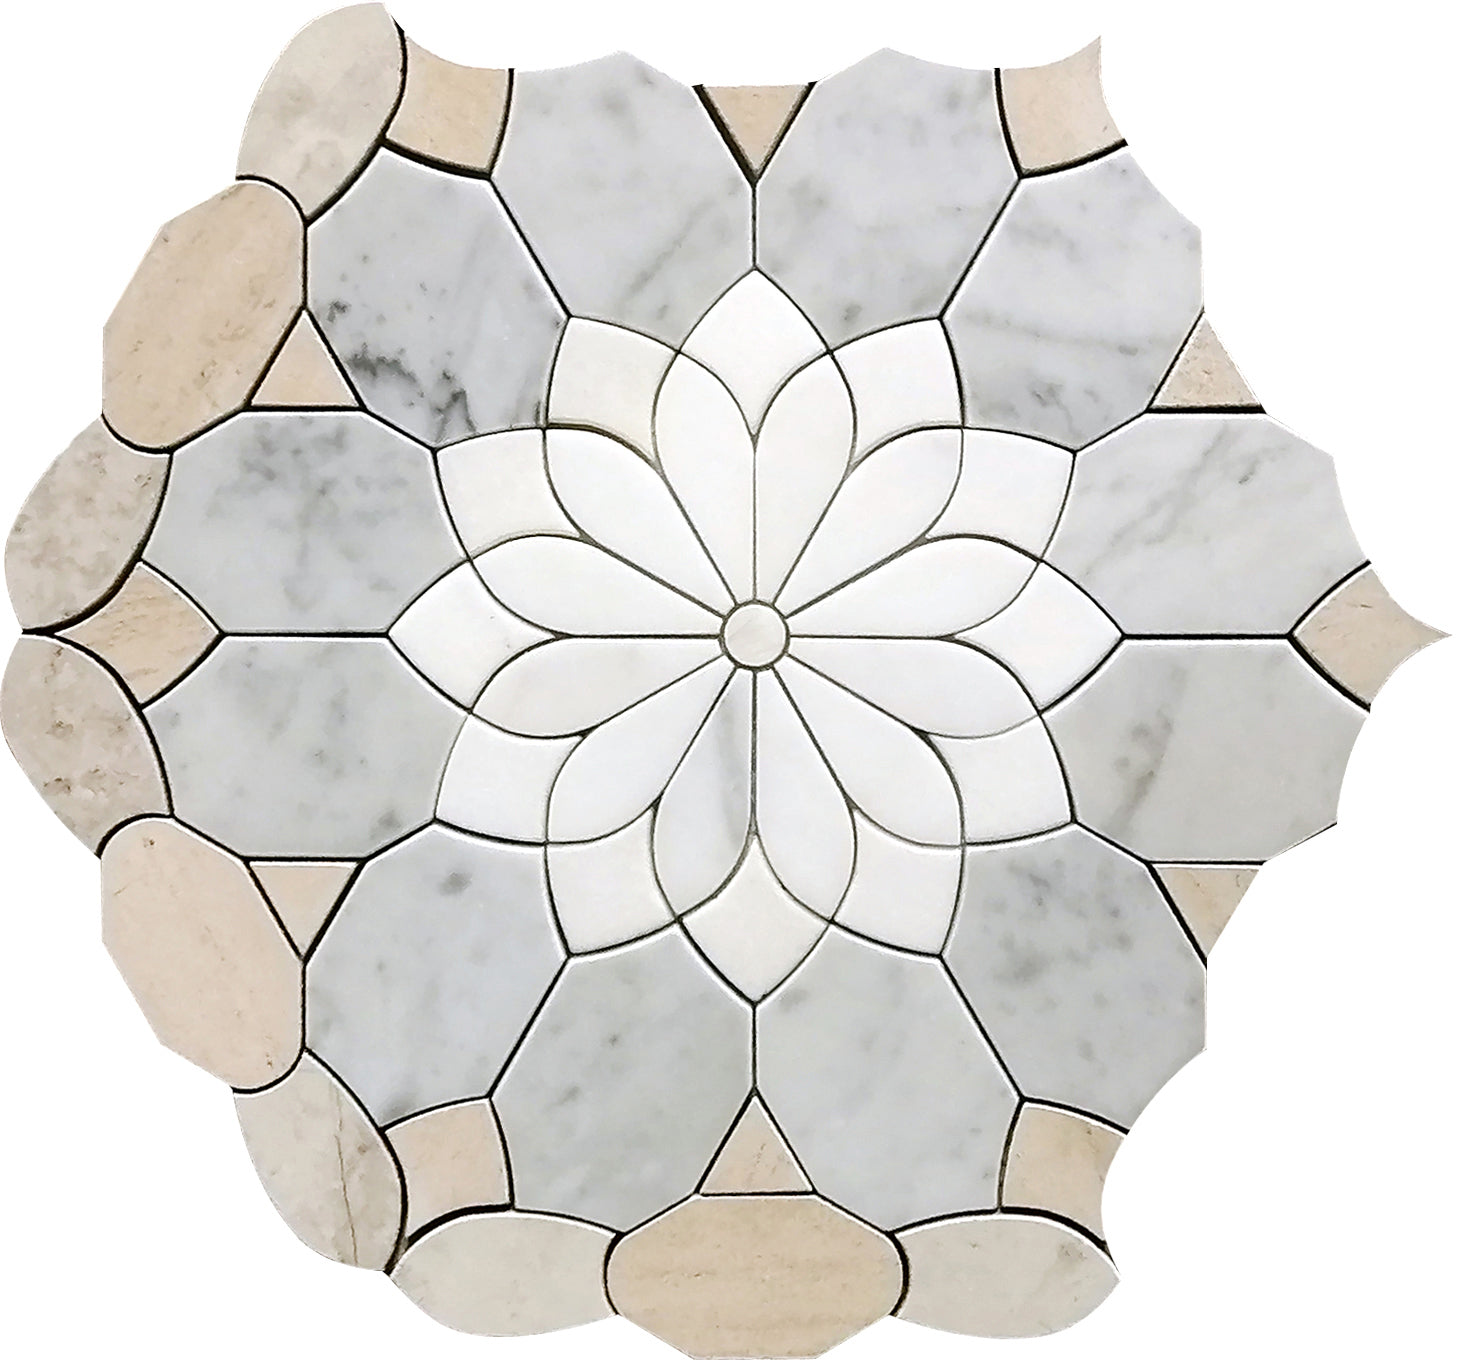 mir skalini waterjet margo 7 wall and floor mosaic distributed by surface group natural materials